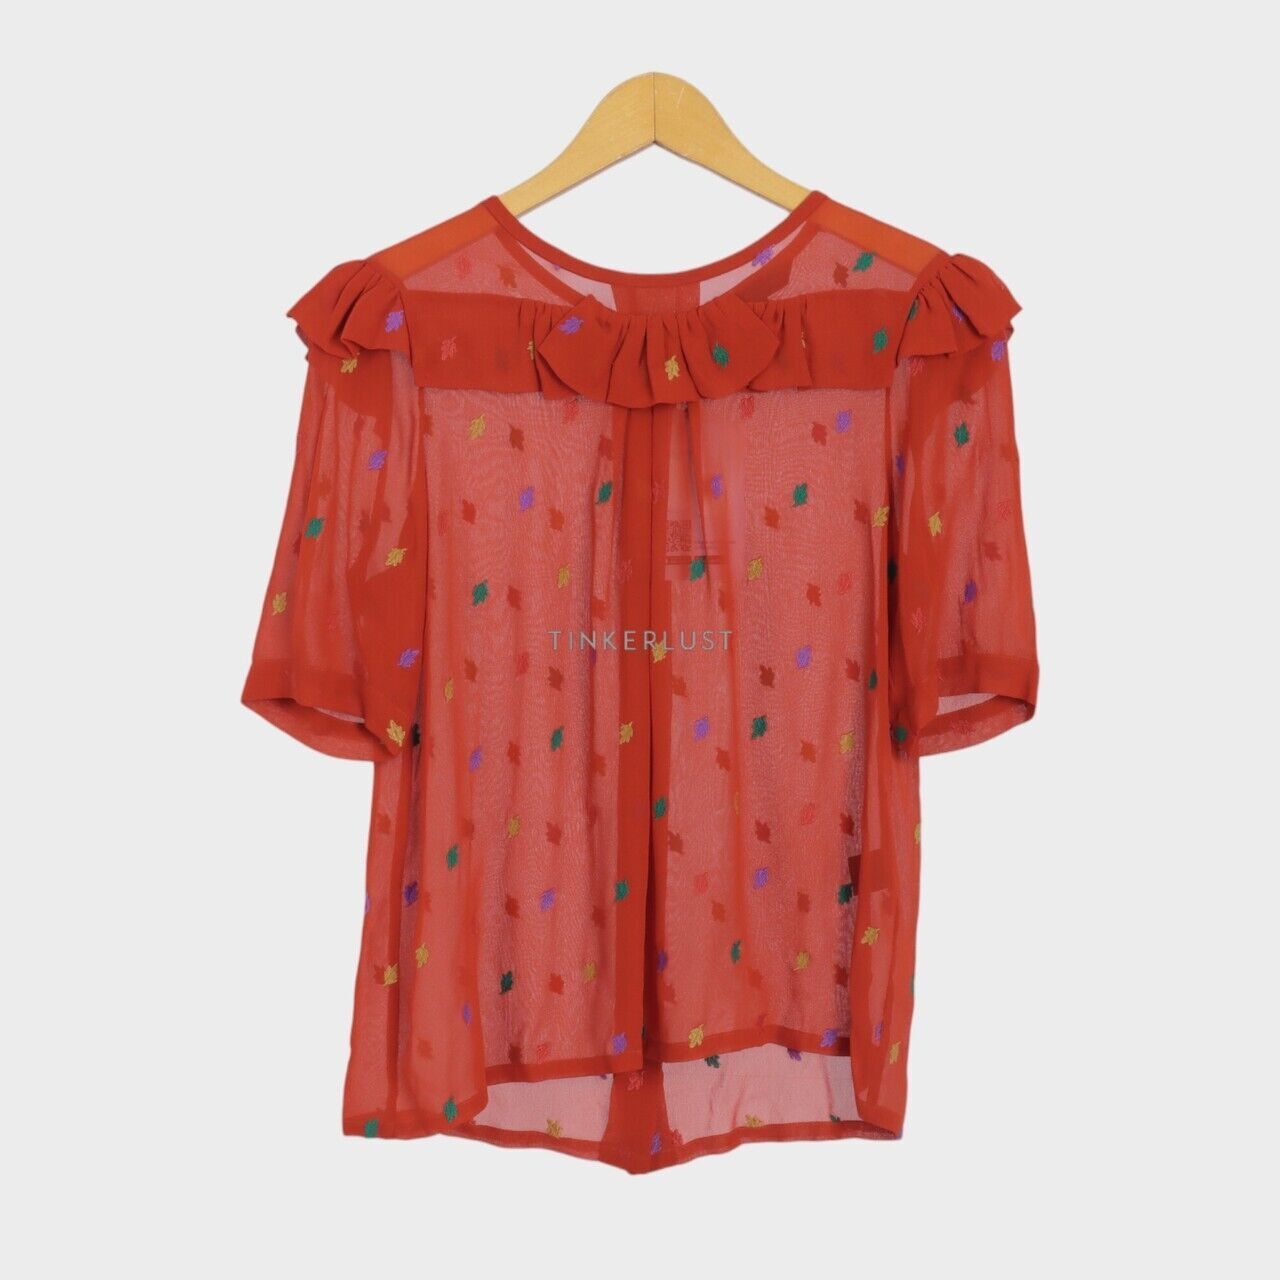 Marc by Marc Jacobs Orange Sheer Blouse